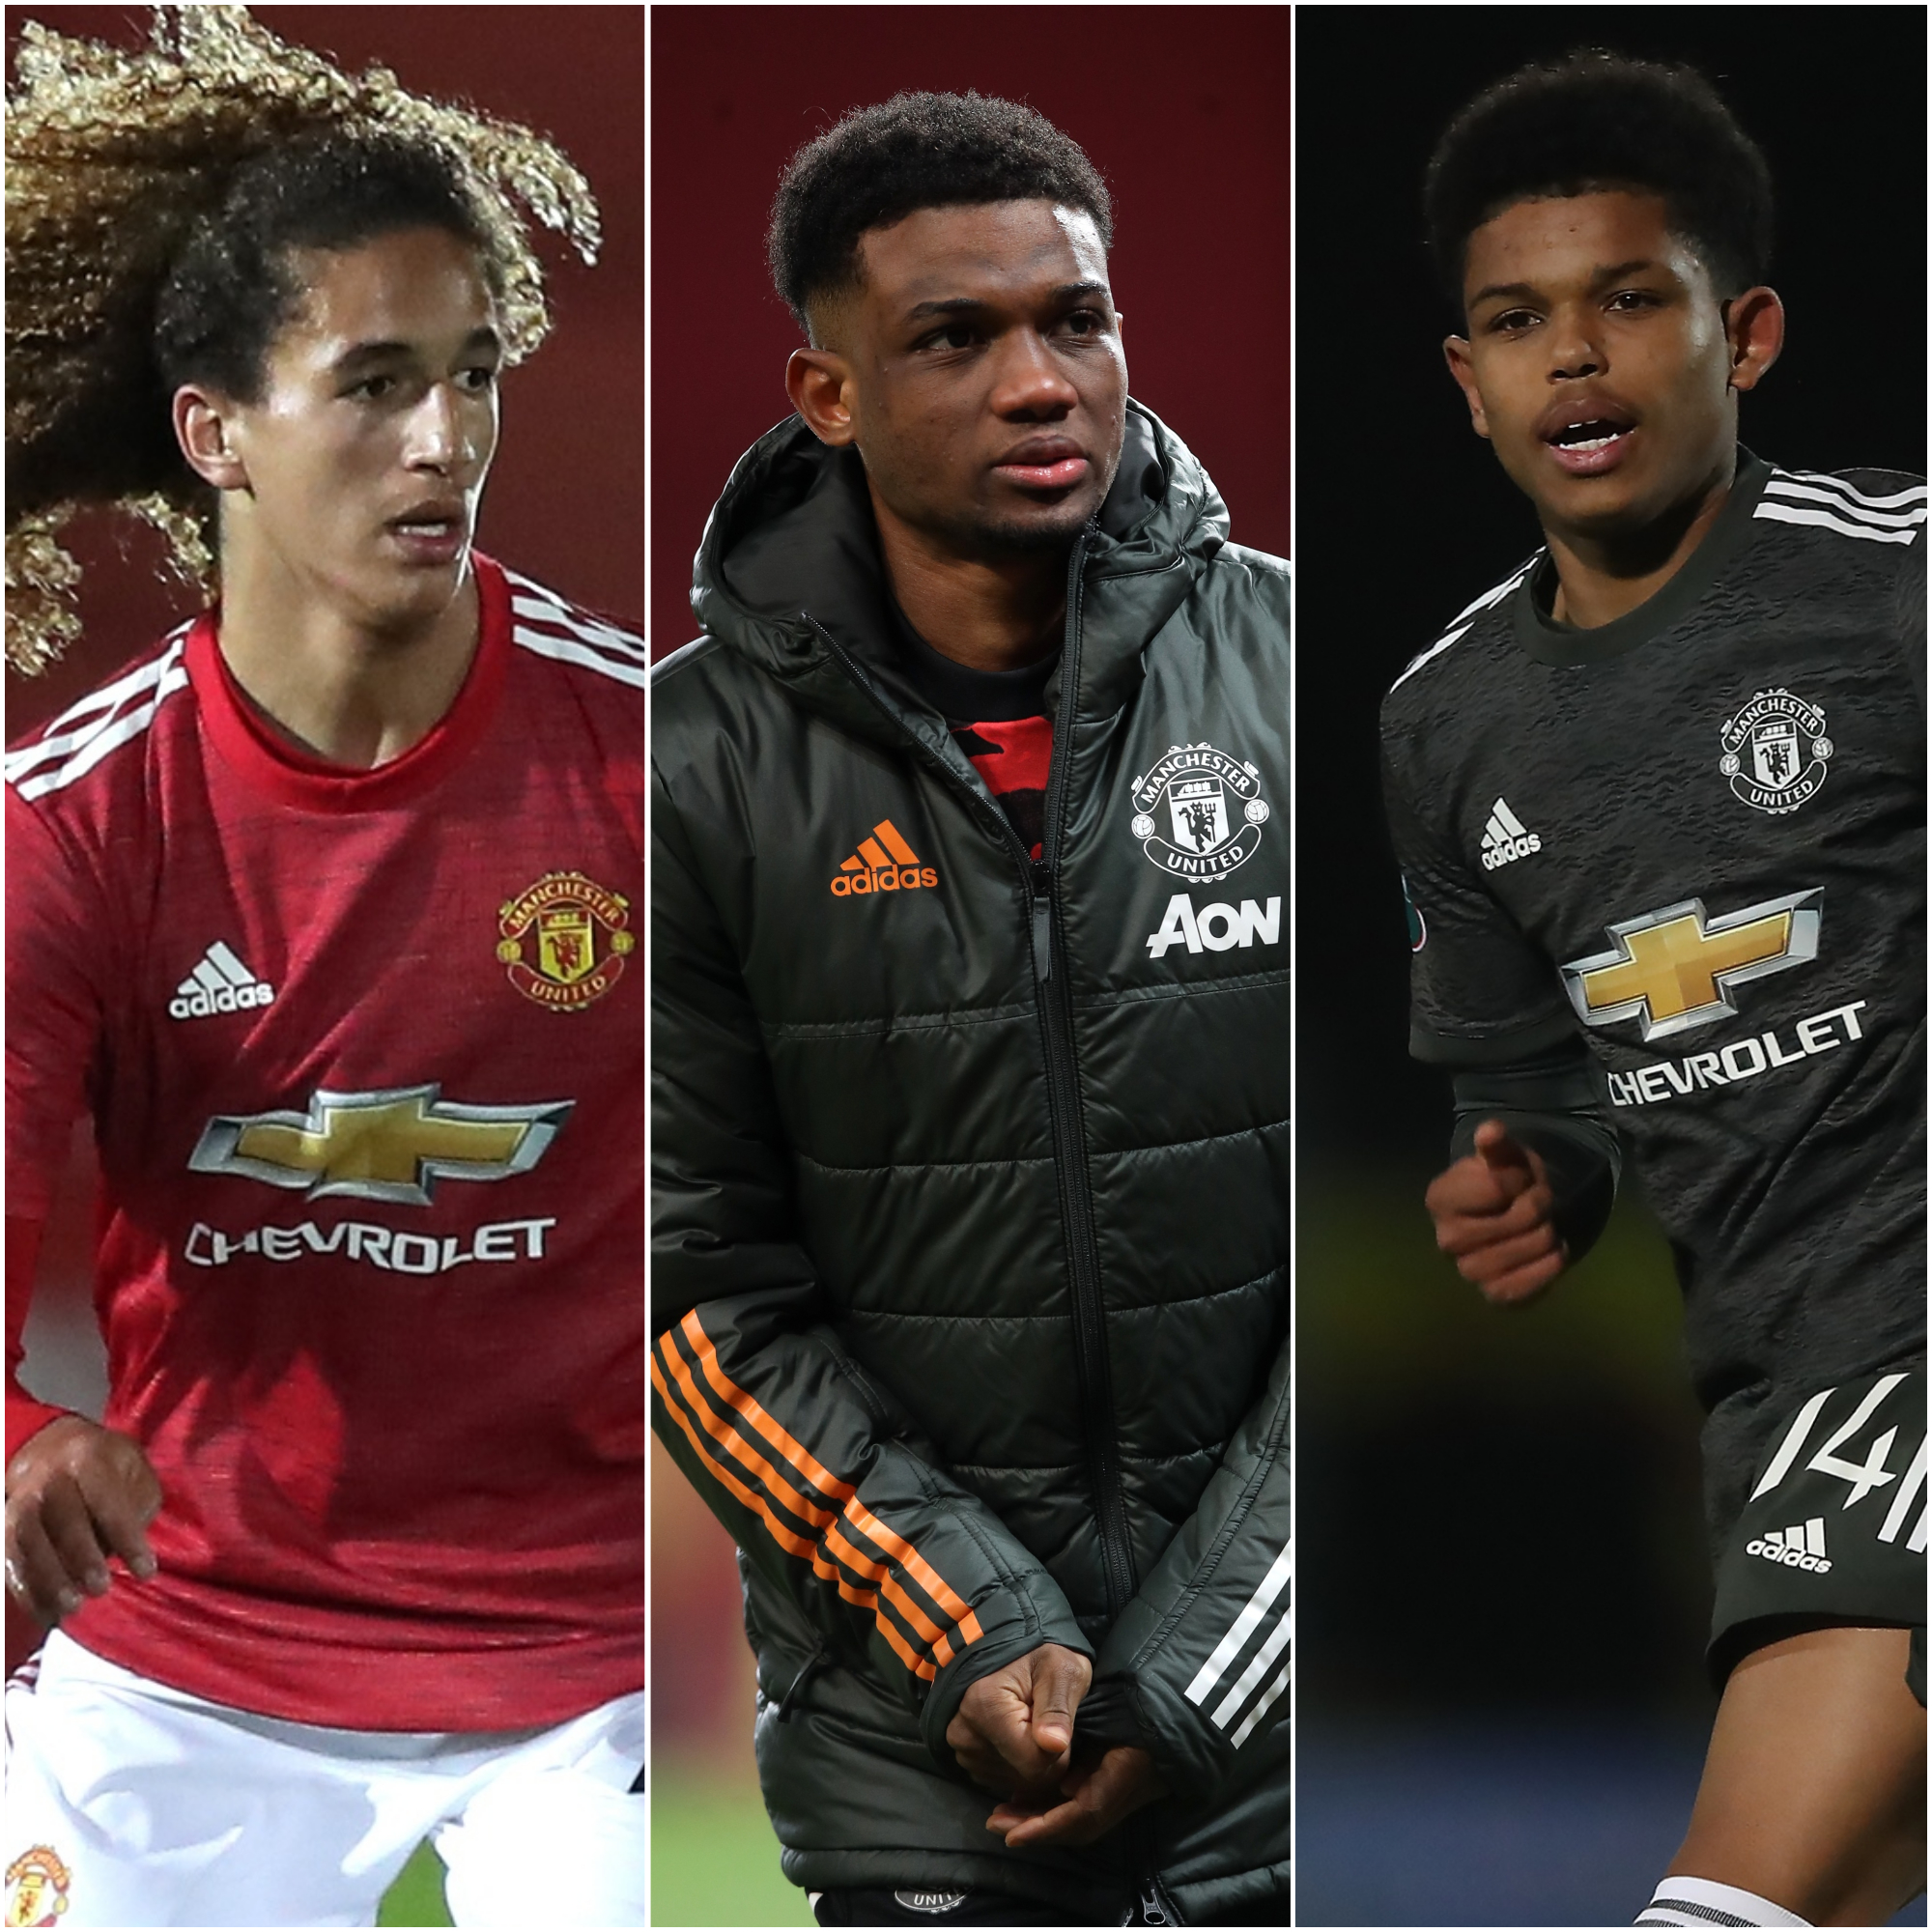 Hannibal Mejbri, Amad Diallo and Shola Shoretire are impressing at Manchester United